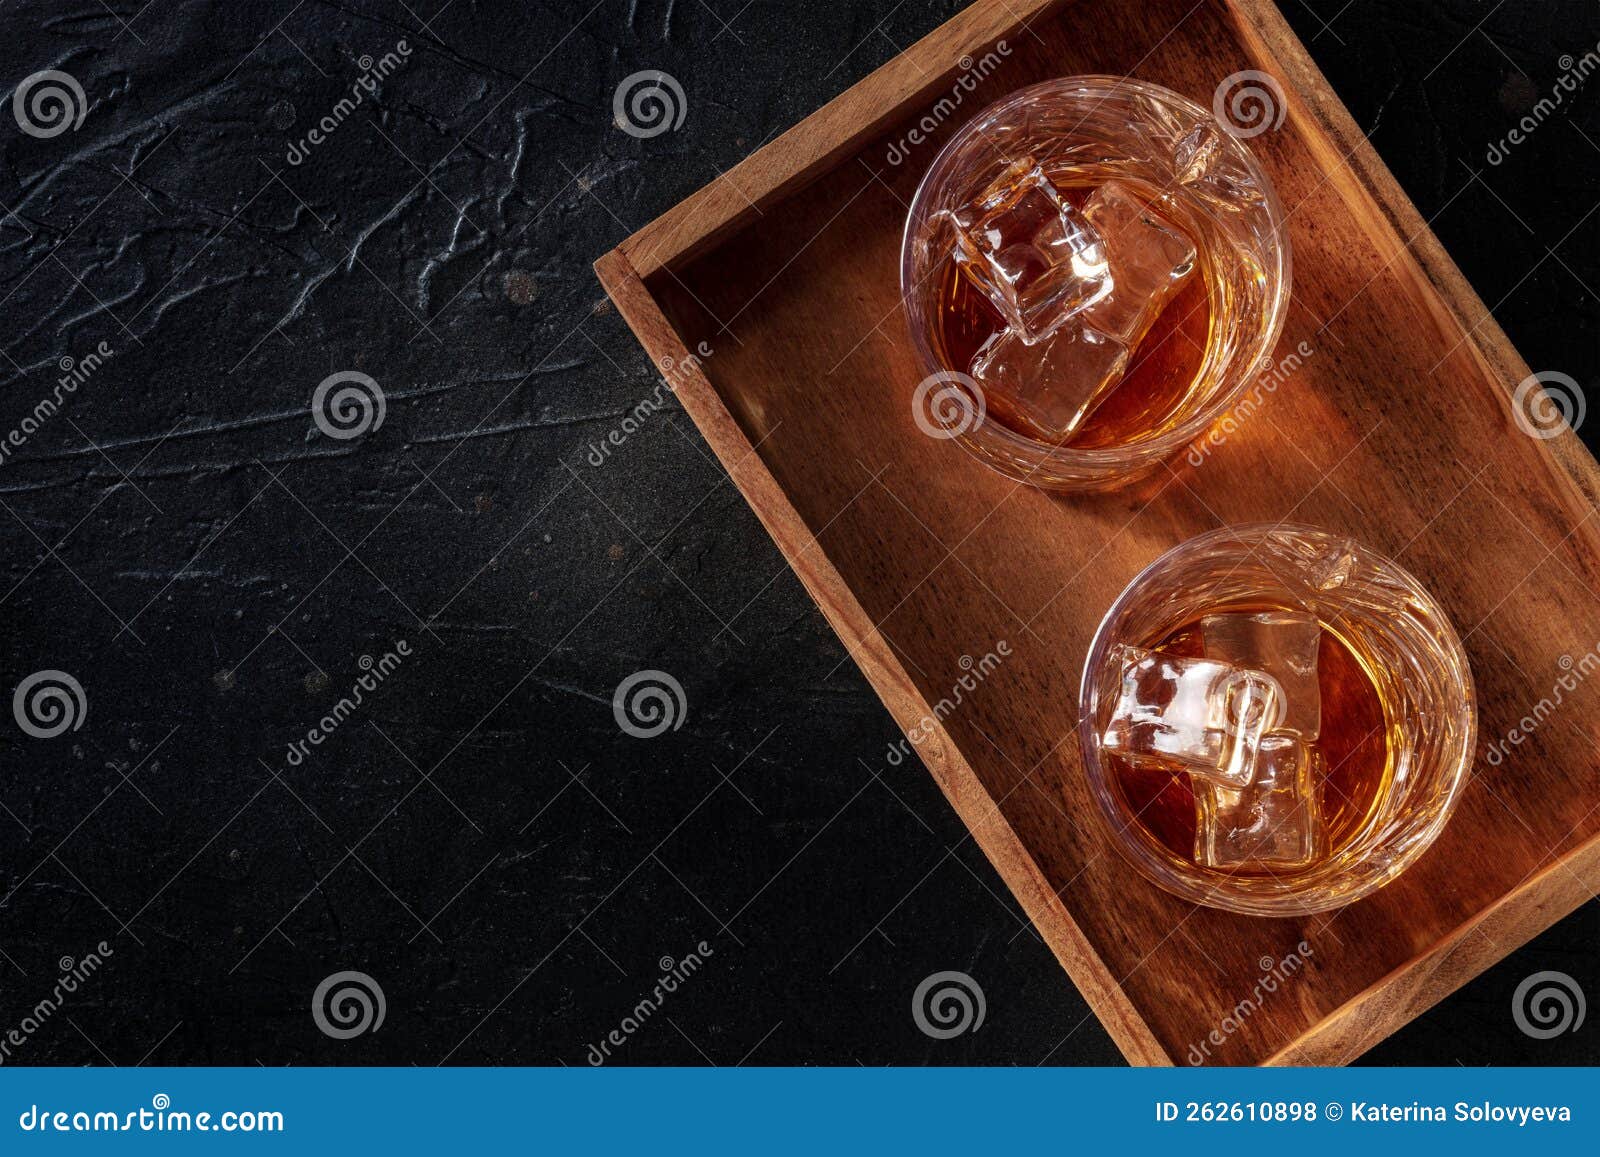 whiskey in glasses with ice. bourbon whisky on rocks on a black slate background